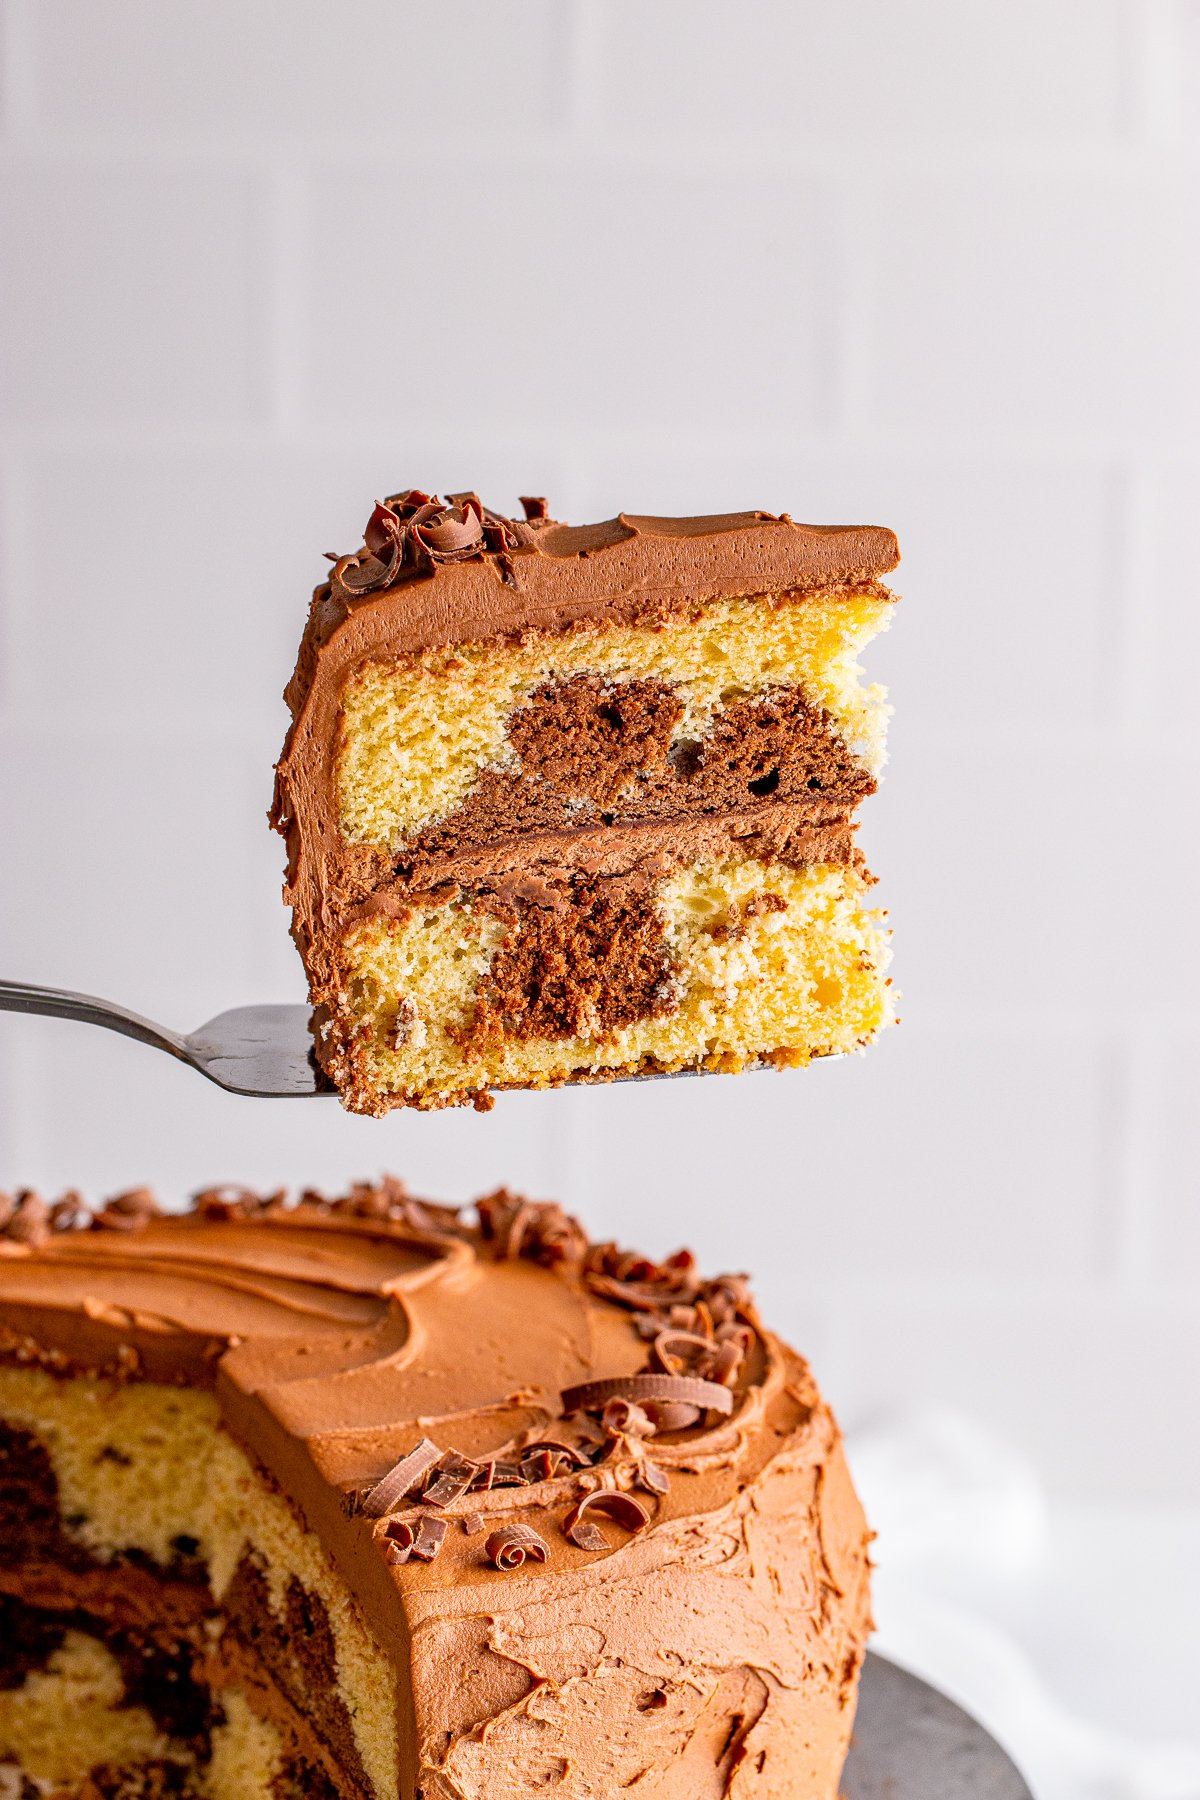 Cake server holding up a slice of the Marble Cake Recipe.